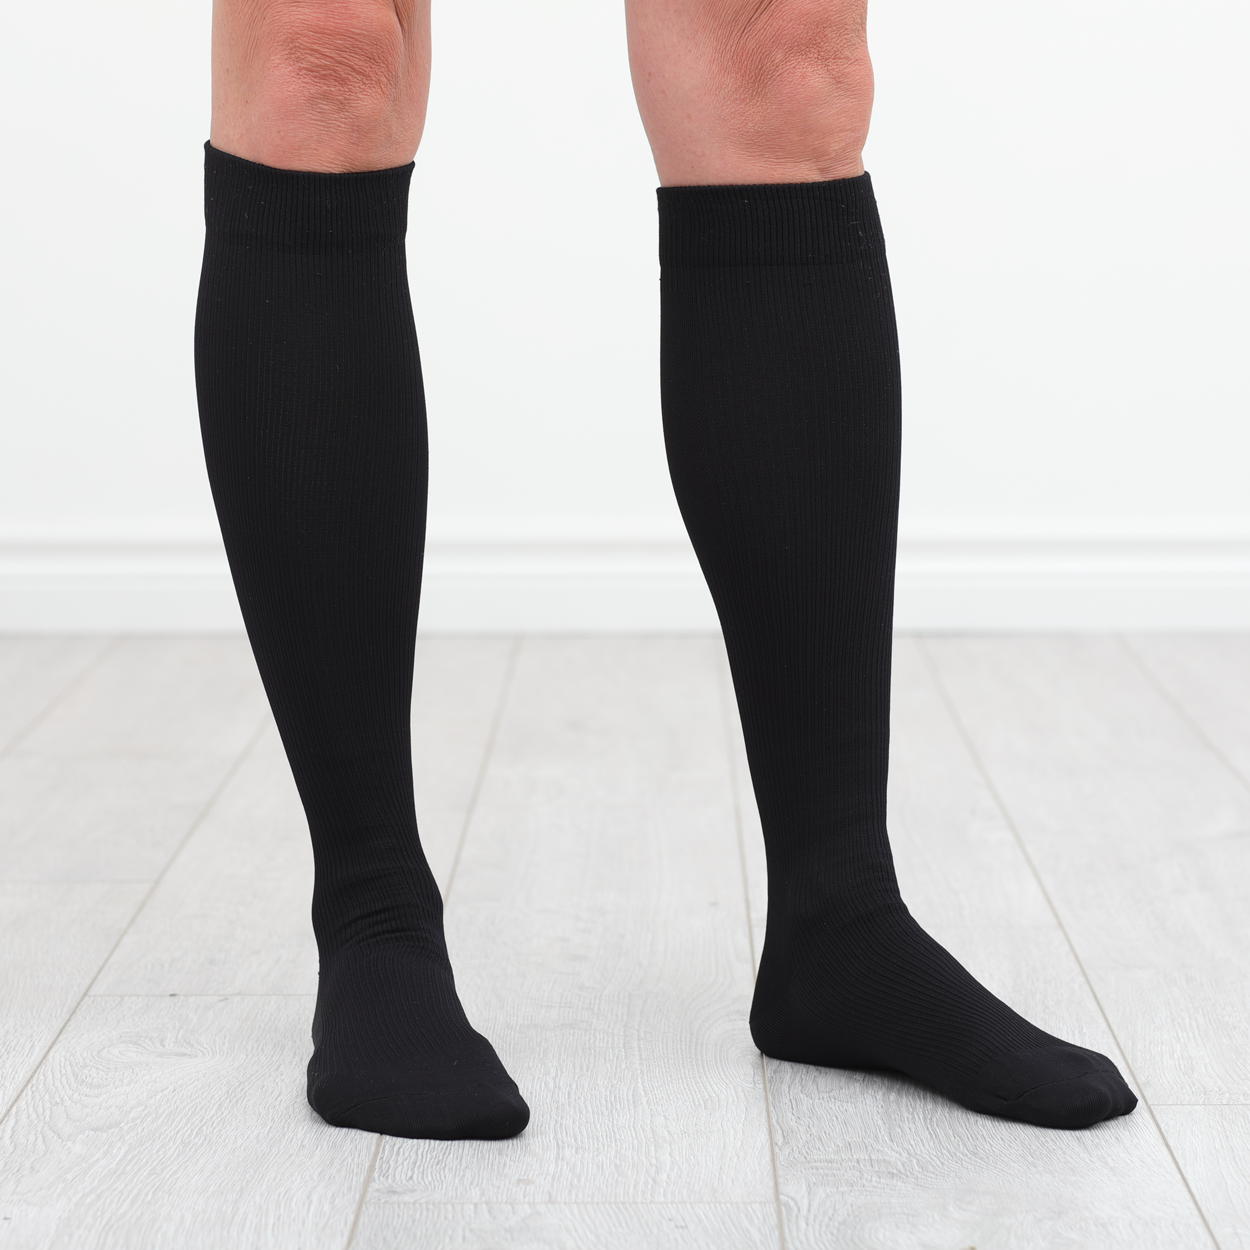 Cellulite: The Benefits of Compression Garments and Stockings – BST Medical  Supply